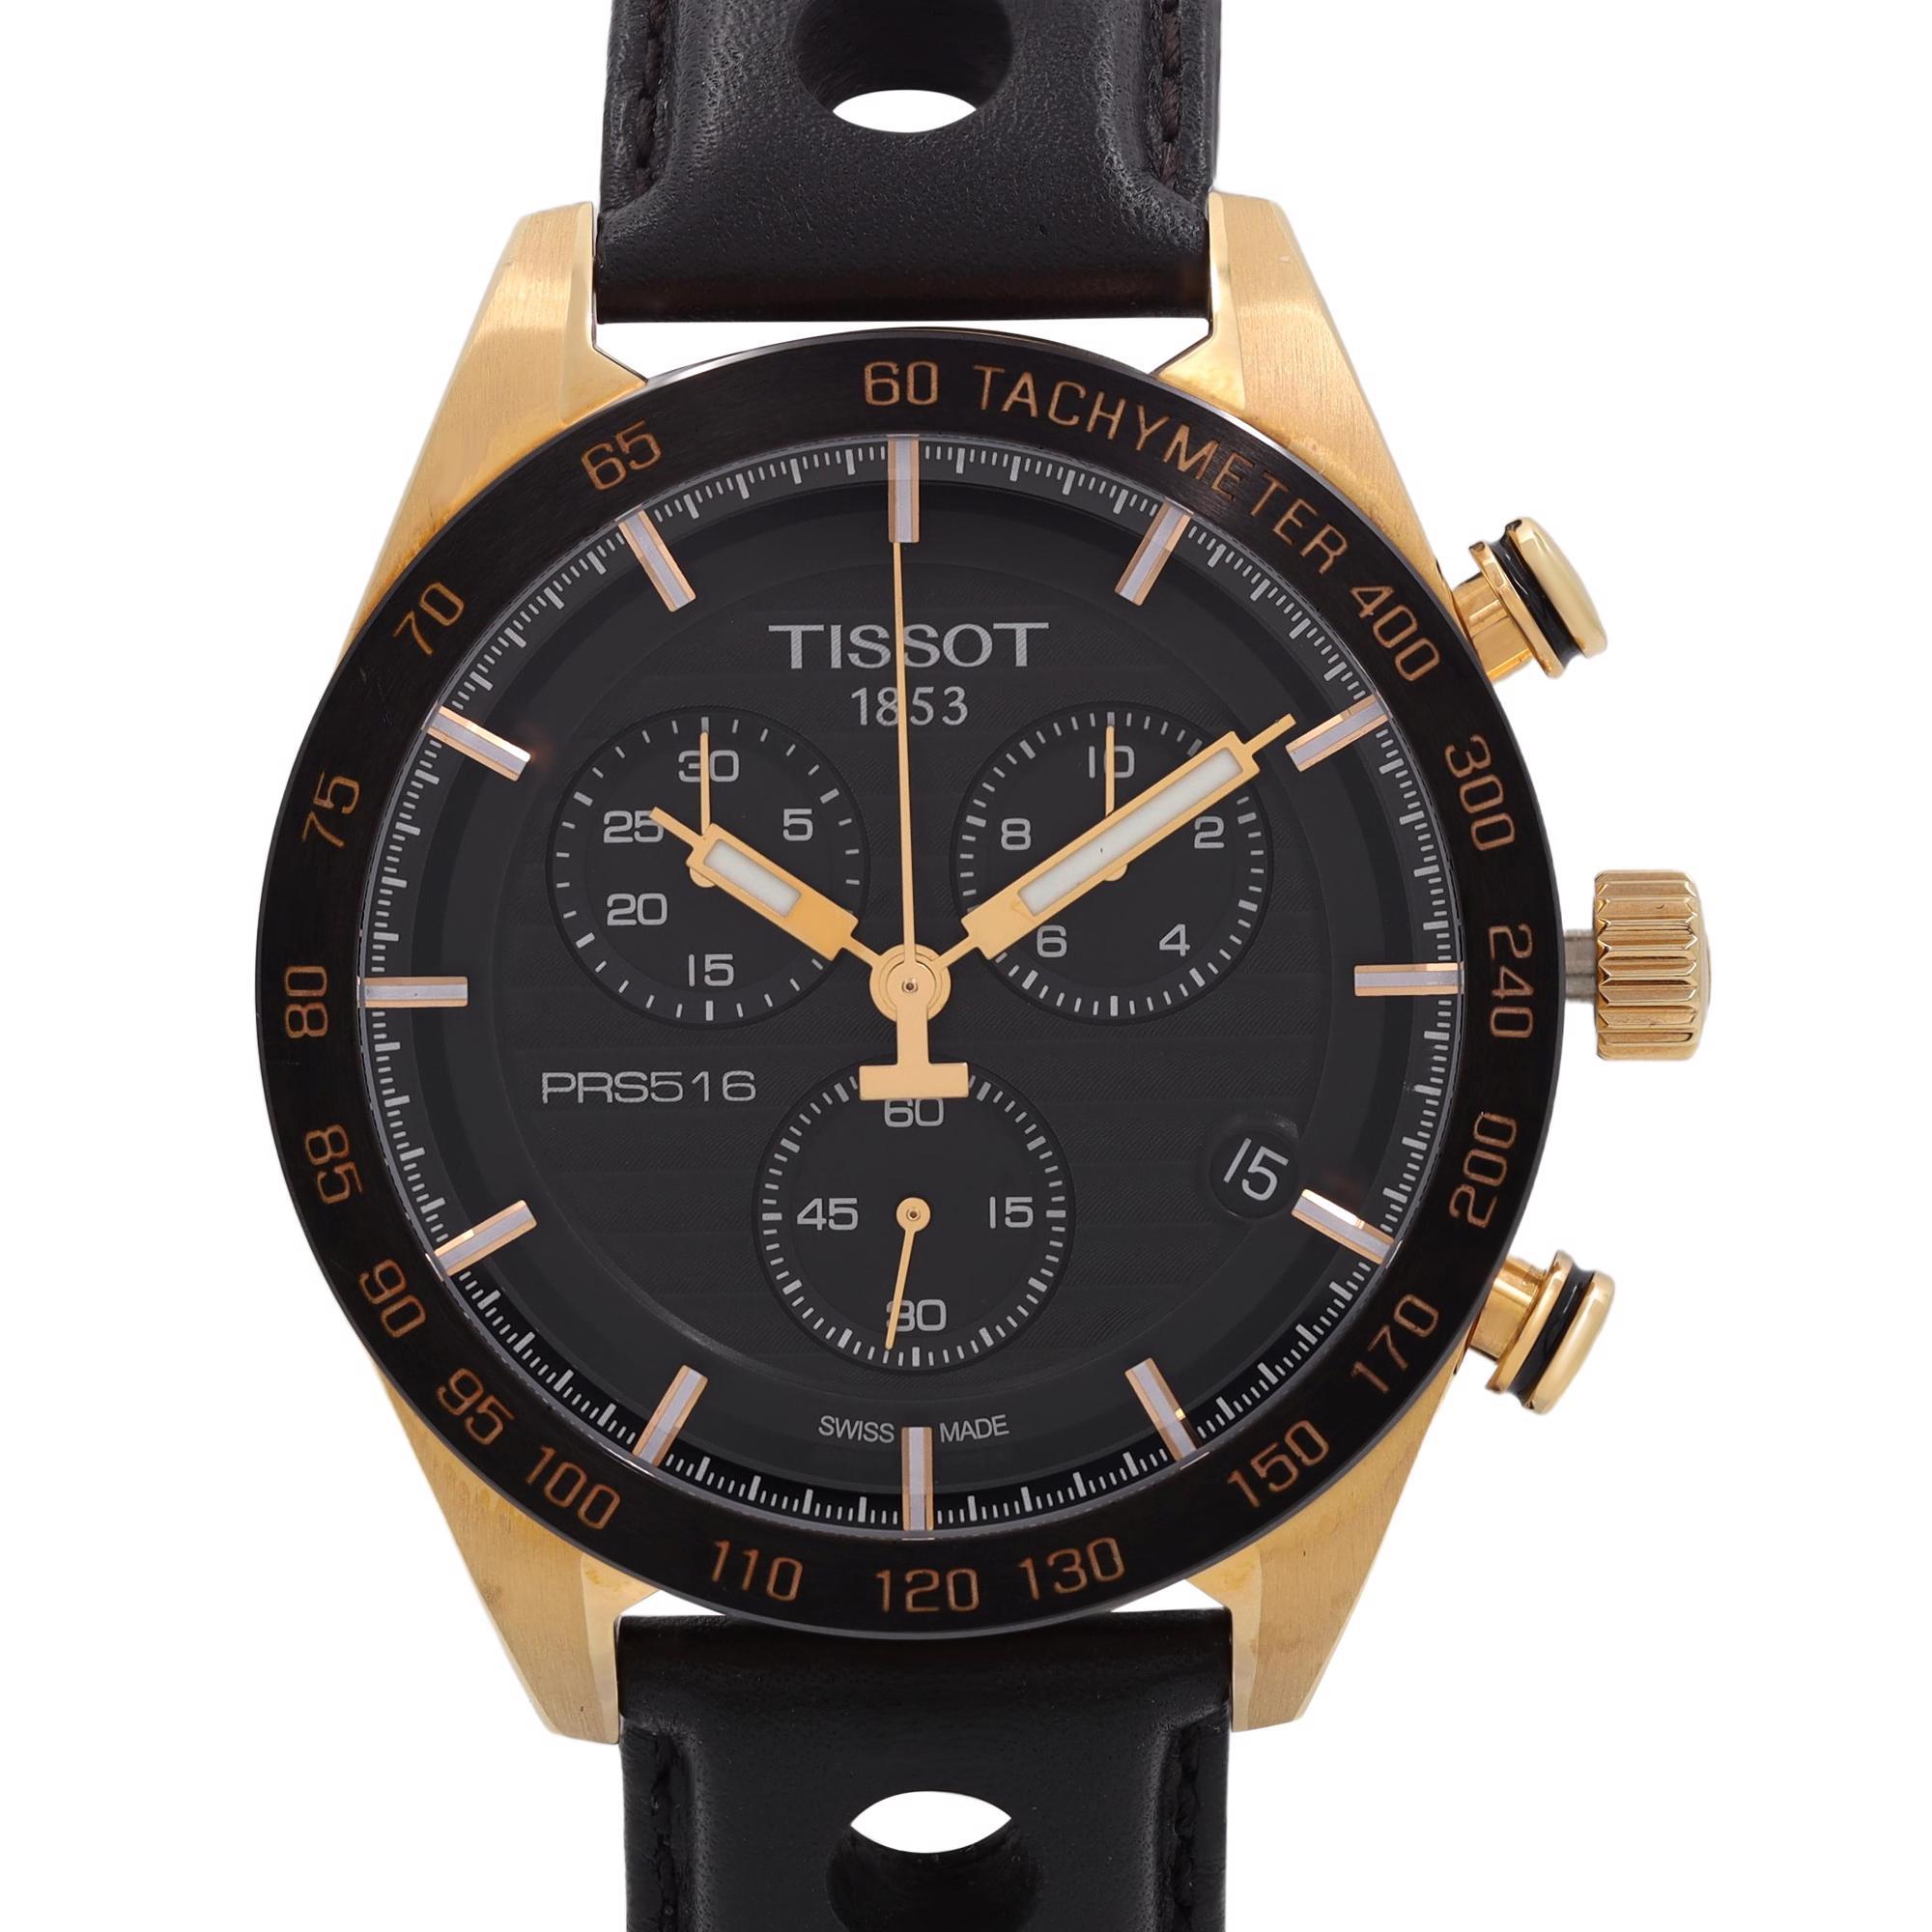 New with Defects Tissot PRS516 Quartz Watch T100.417.36.051.00. The Watch has Blemishes in the form of minor dents or scratches on the case and may have damages on the inner side of the band. This Beautiful Timepiece is Powered by a Quartz (Battery)